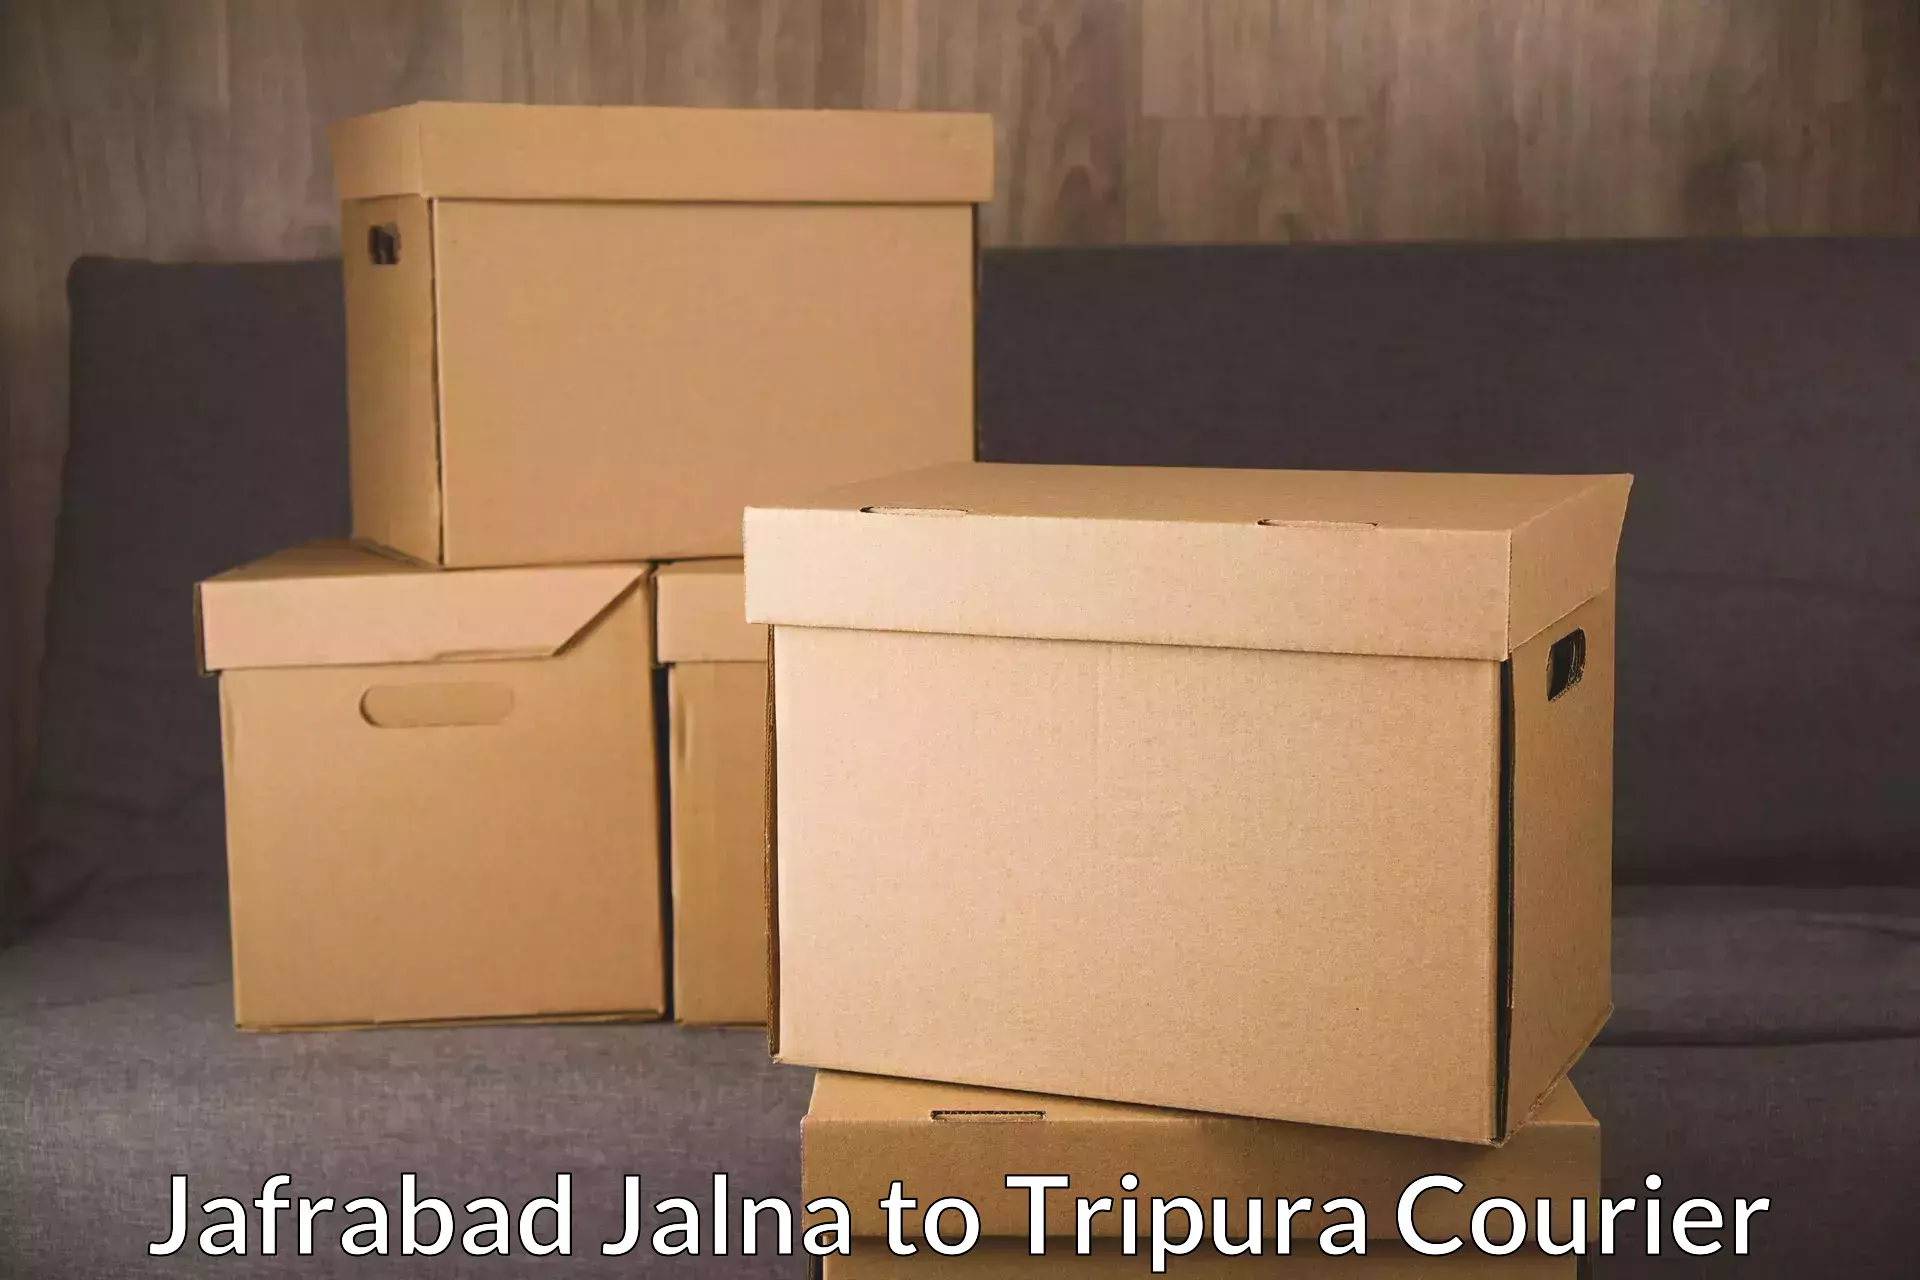 Courier service booking Jafrabad Jalna to Udaipur Tripura